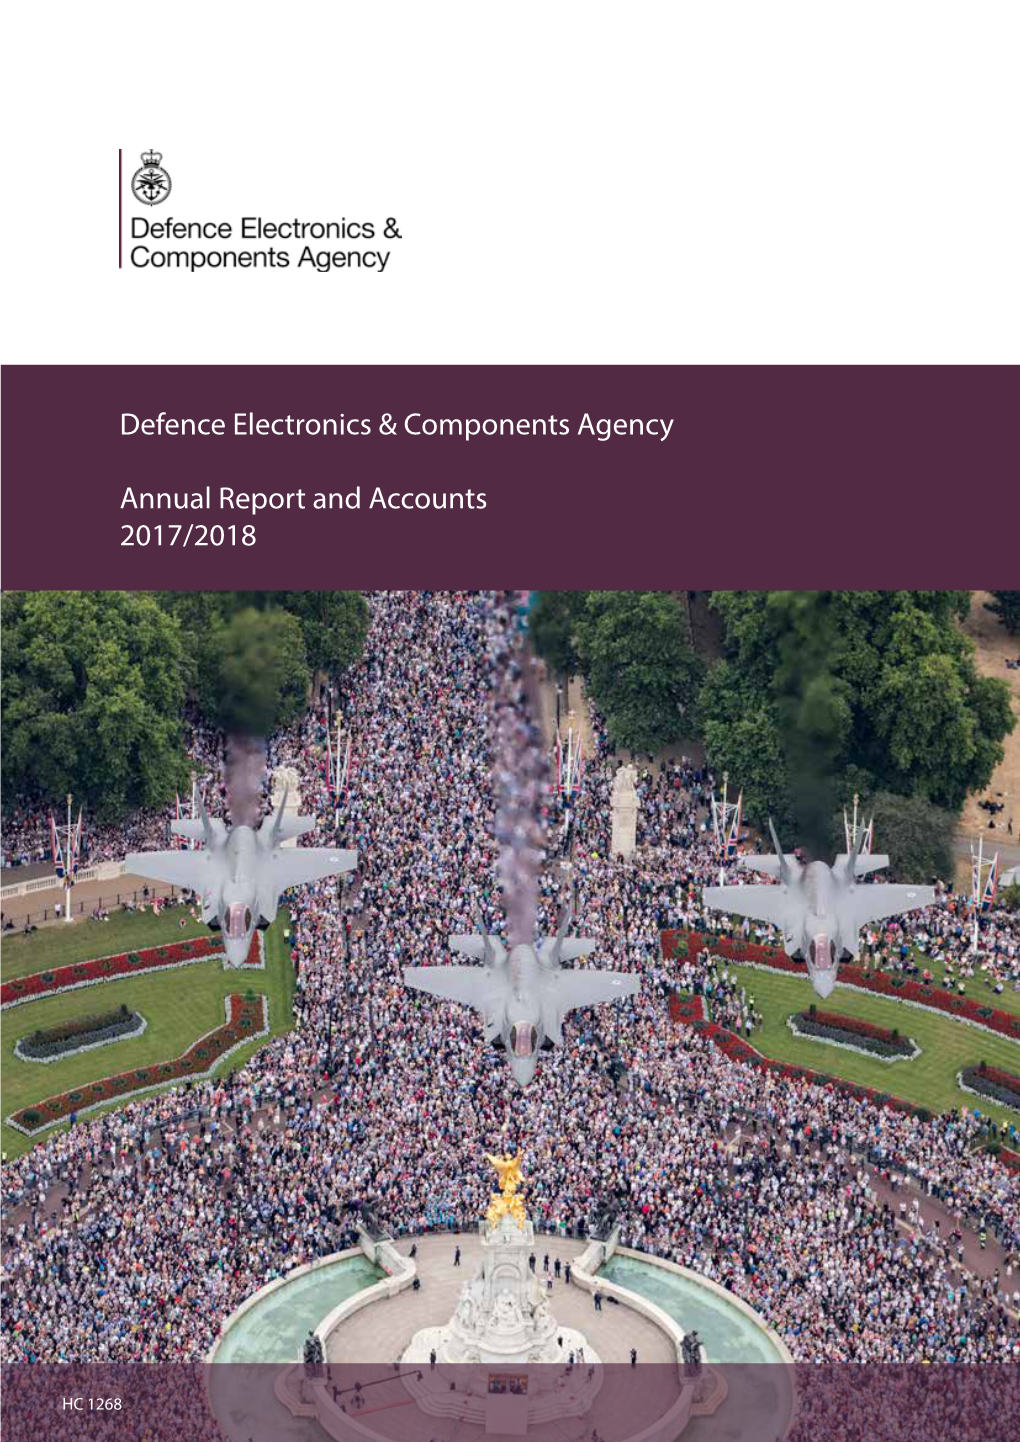 Defence Electronics & Components Agency Annual Report